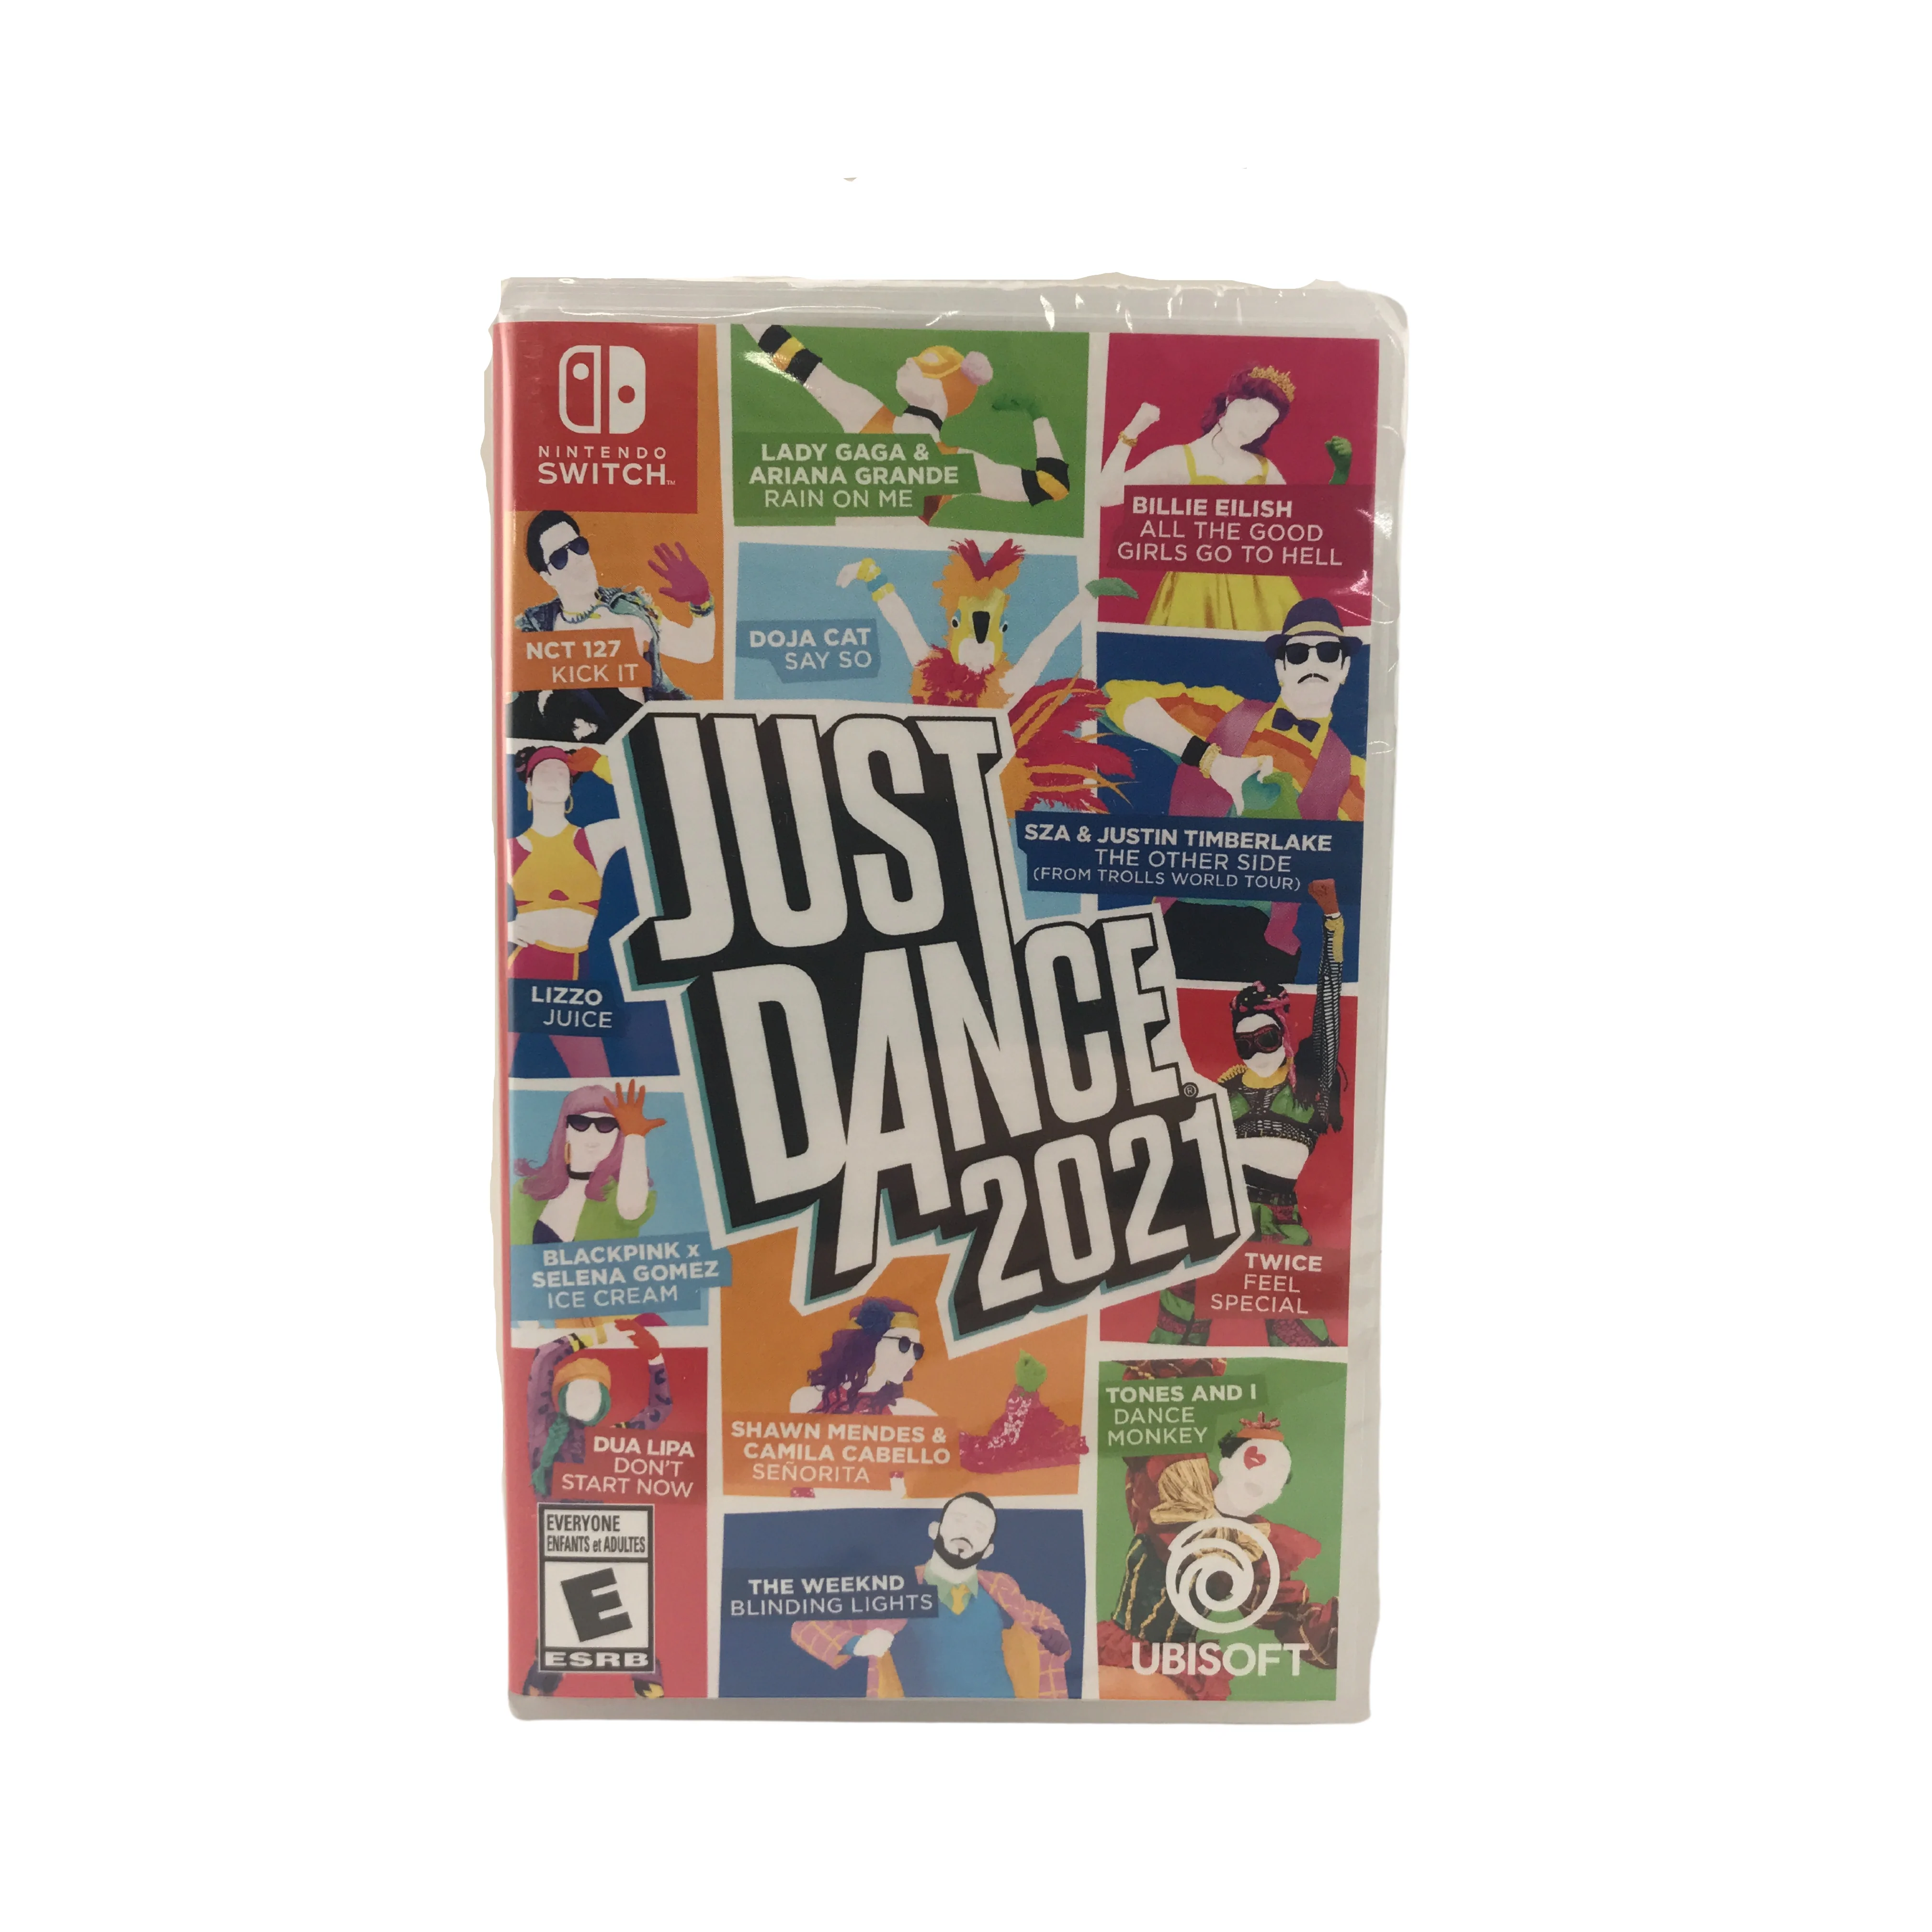 Nintendo Switch Just Dance 2021 Video Game: Rated Everyone / 1-6 Players